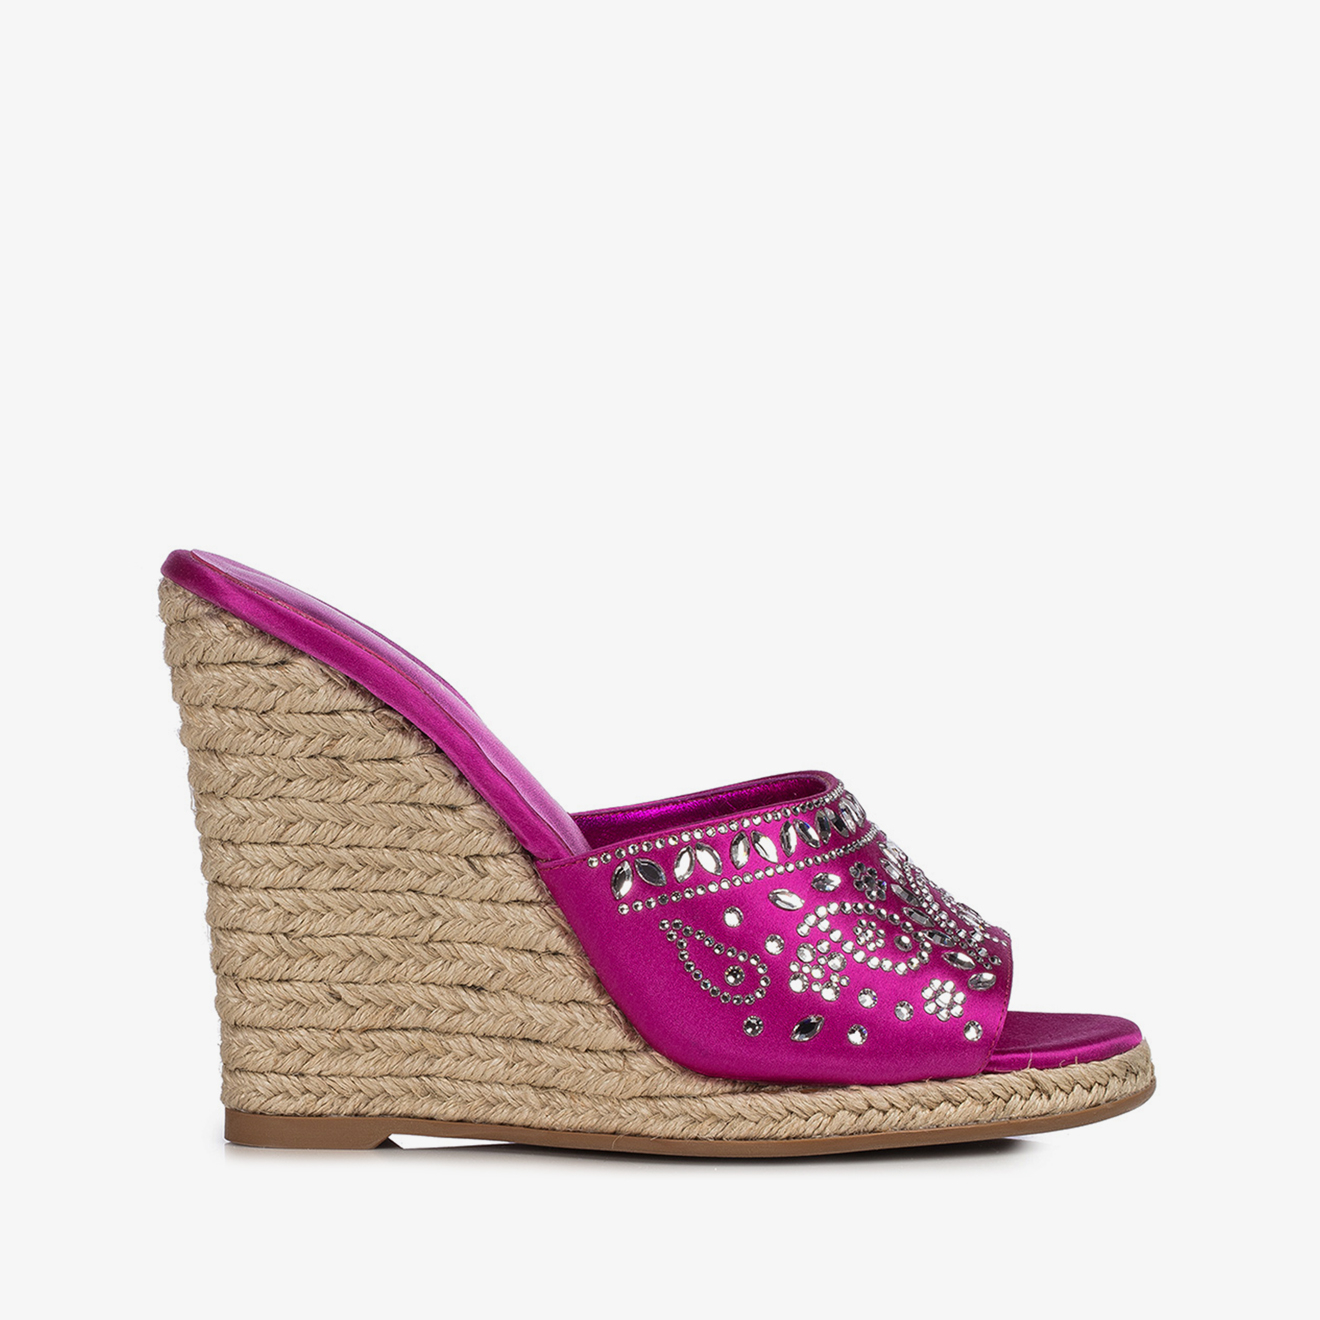 TWILLY SANDAL 120 mm - Le Silla official outlet